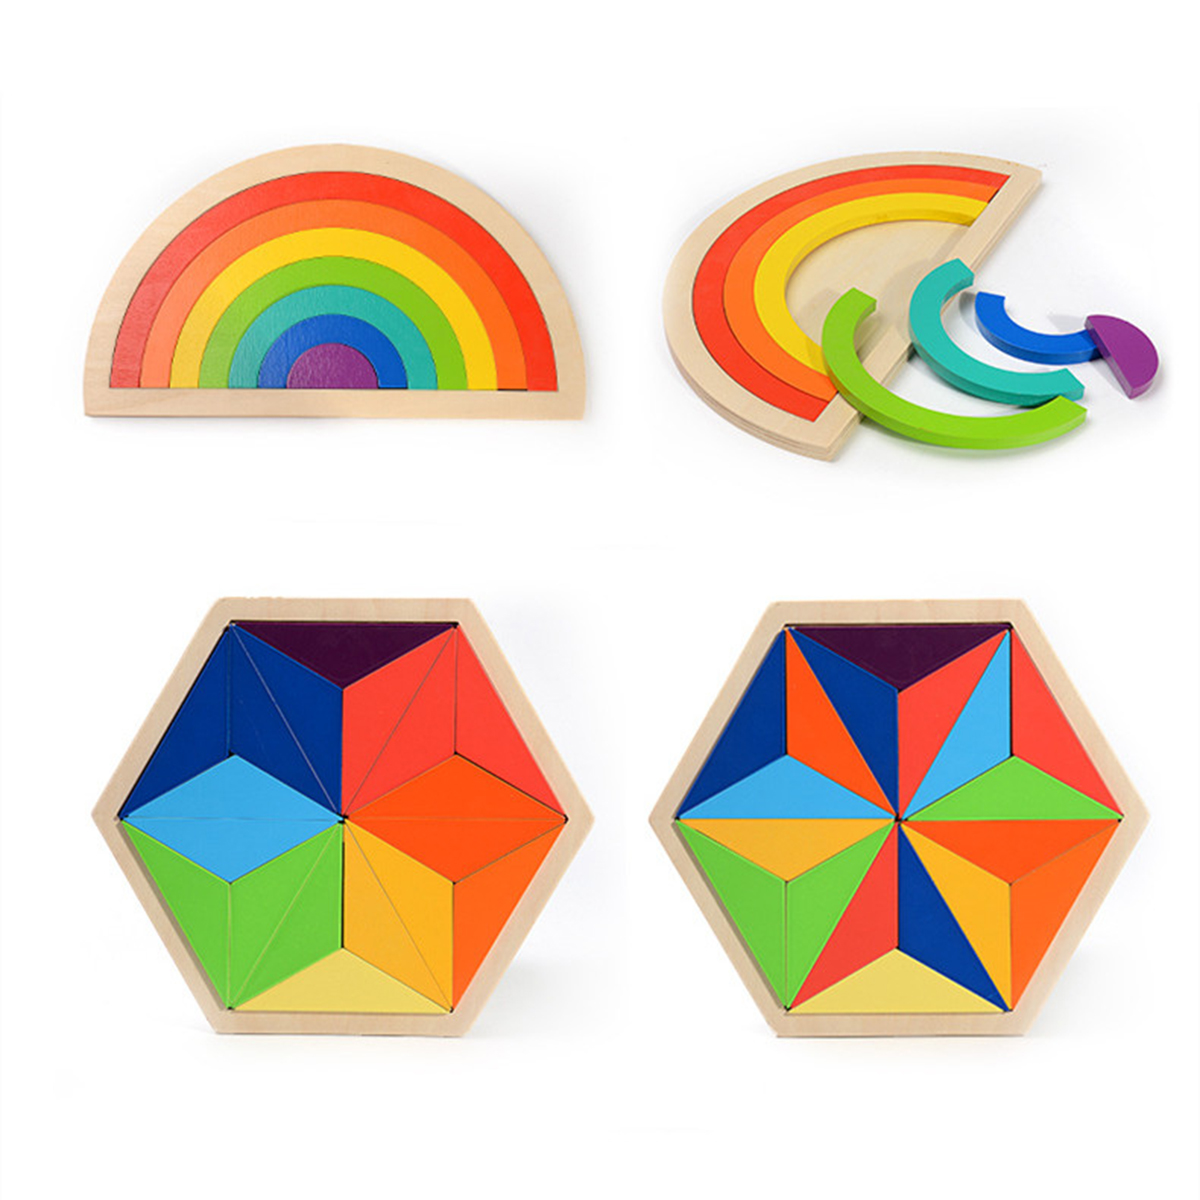 Colorful-Rainbow-Wooden-Blocks-Jigsaw-Puzzle-Toys-Kids-Learning-Educational-Game-1621515-6